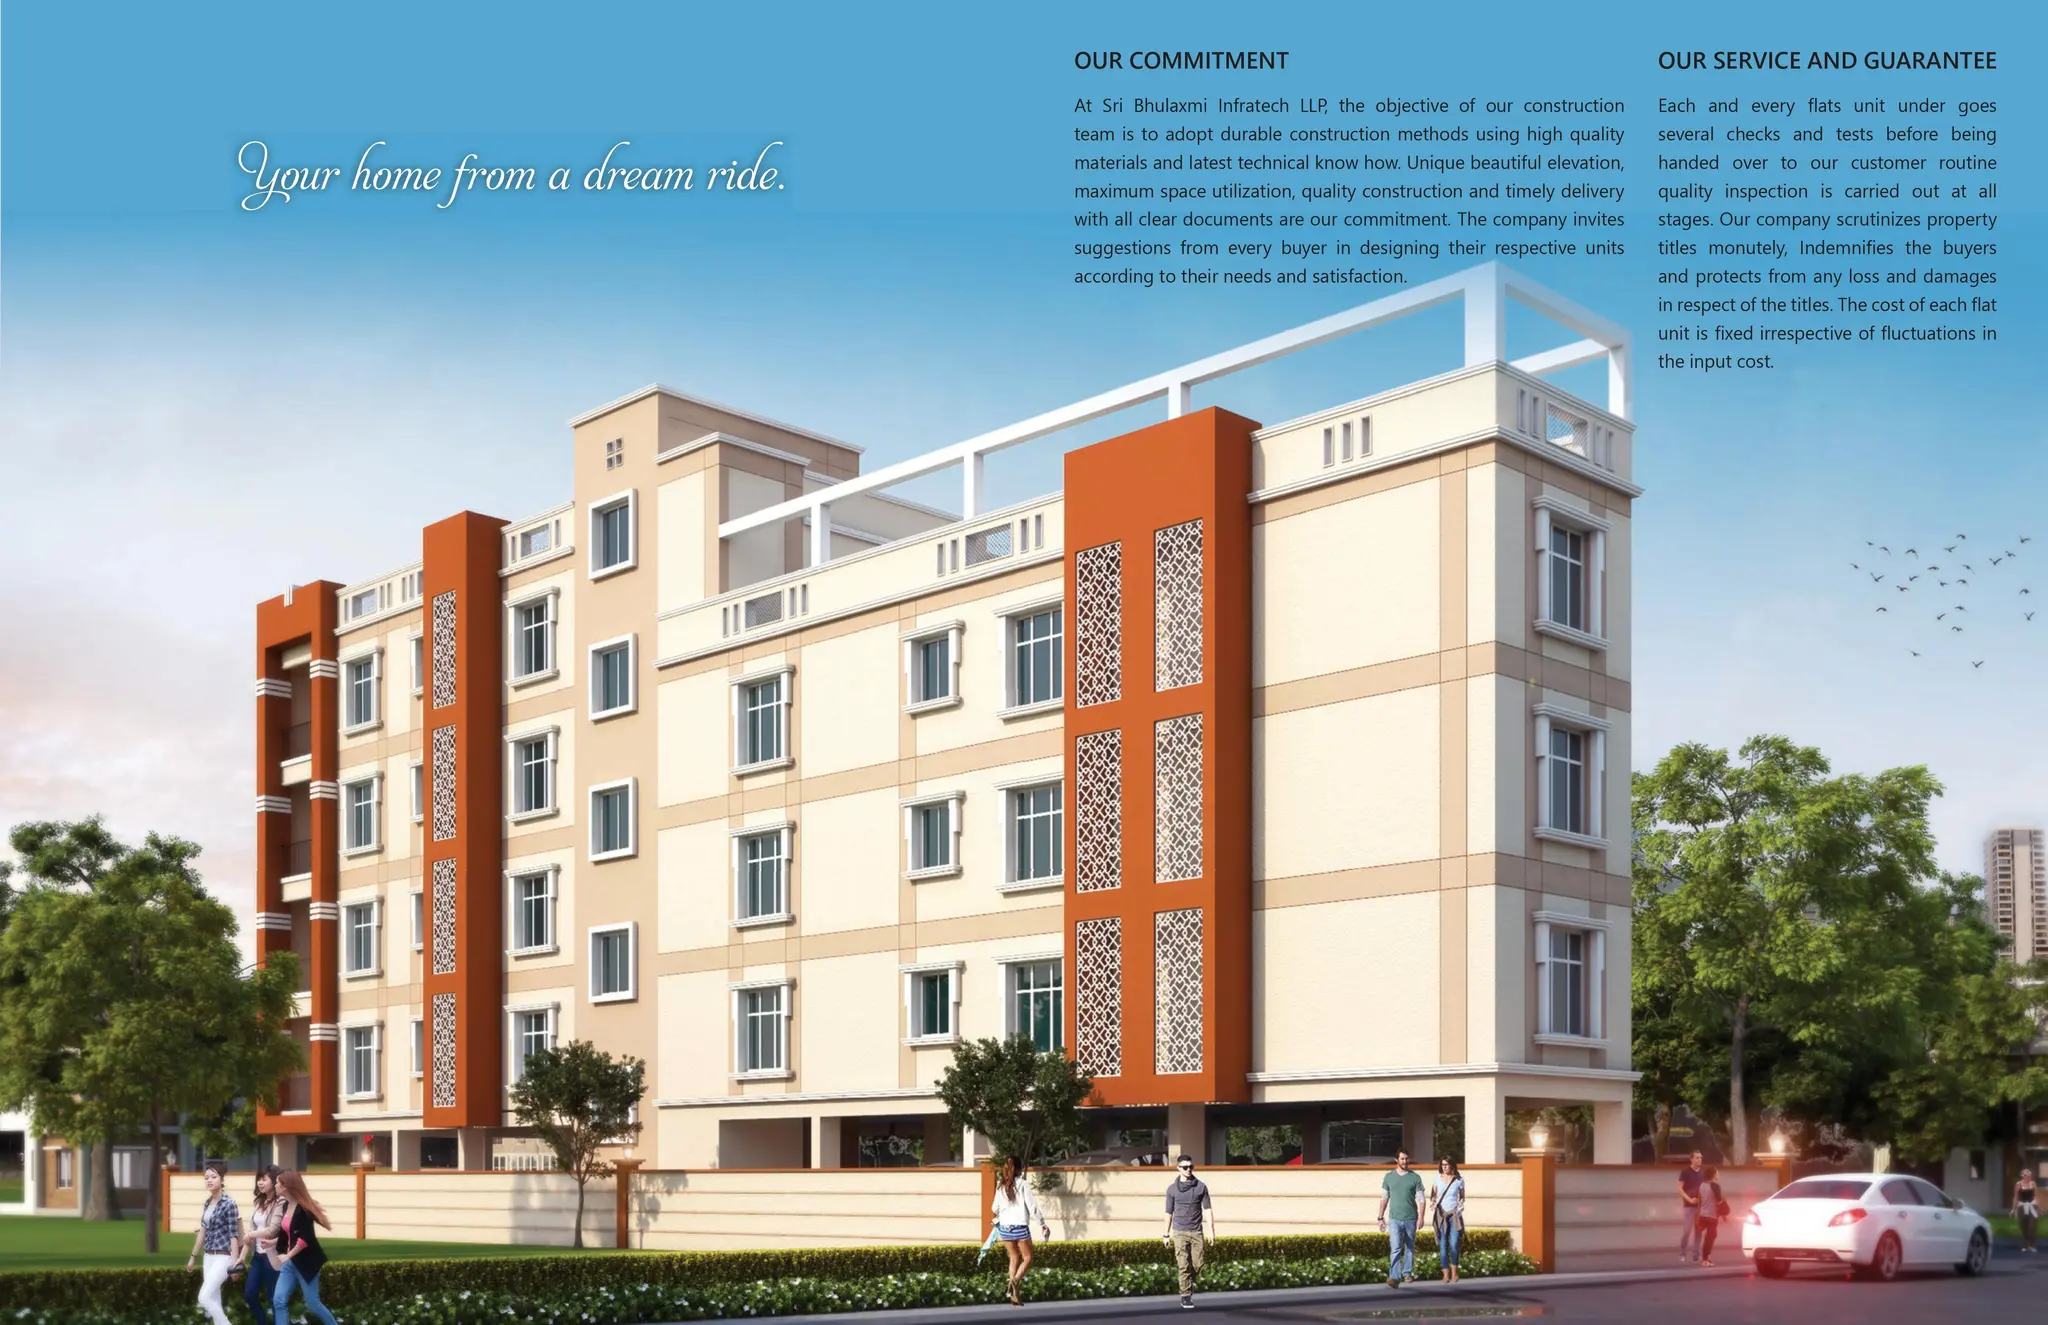 WELCOME TO A CHIC LIVING.
A home of families, SAI Nirmalya is a marvel of unification of the epitome in civil engineering,
architecture, interior design, technology and environmental consciousness. this luxurious structure
flats each equipped with ultra-modern sleek design, amenities such as community hall, individual
car parking space, extra two wheeler parking space, 24x7 power backup, Automatic elevator among
others. This avenue apartment is earthquake resistant and is the pinnacle of opulent life. It is located
at Subudhipur in front of DN Regalia Shopping Mall, which is 6 km. from Khandagiri police station,
1 km from National High way-a serene neighborhood filled with greenery